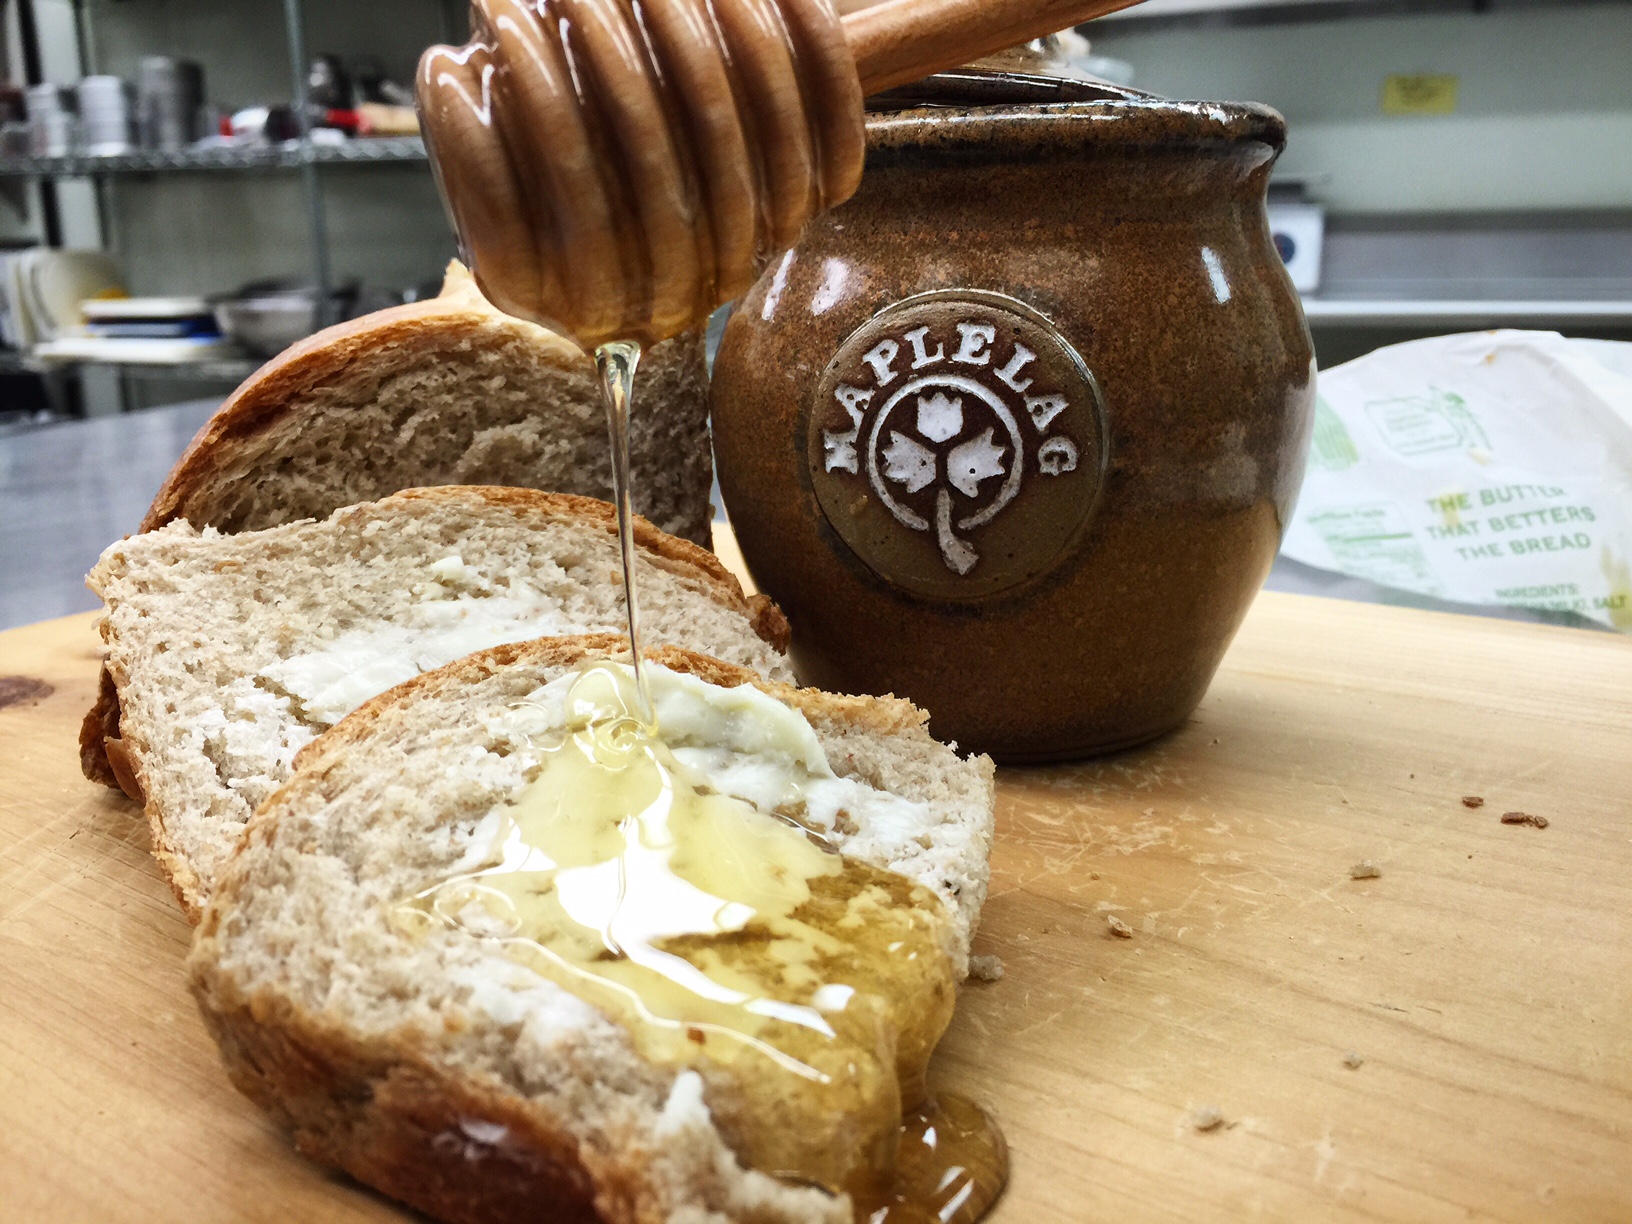 Deb's fresh bread with a spread of Hope Creamery butter and locally harvested honey. November 13th, 2015.